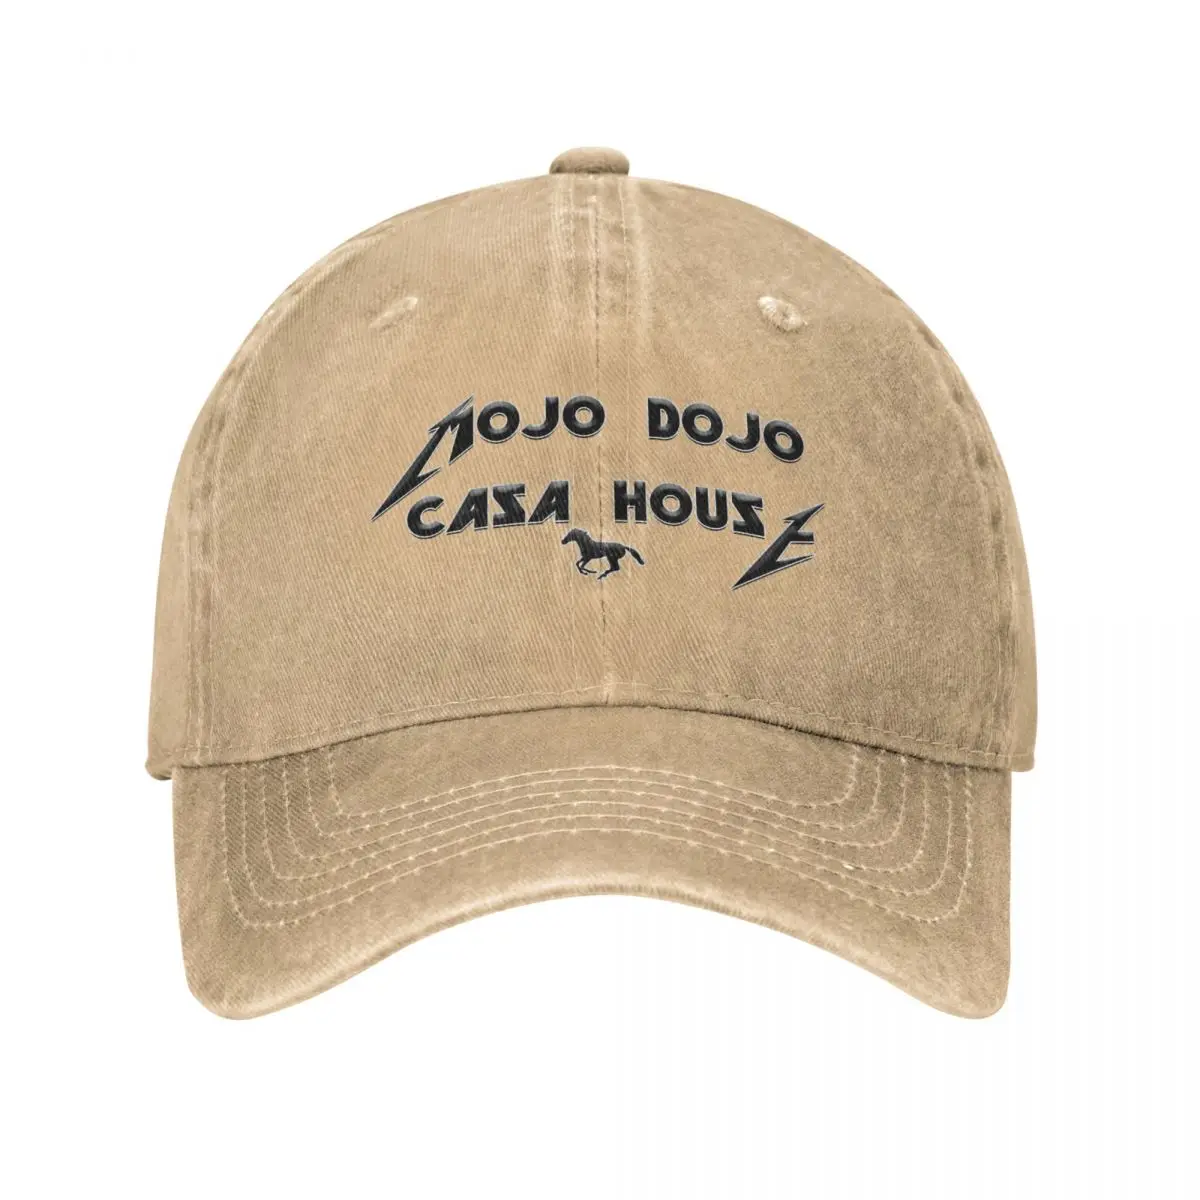 

Vintage Mojo Dojo Casa House Baseball Caps for Men Women Distressed Washed Casquette Dad Hat Outdoor Running Golf Hats Cap